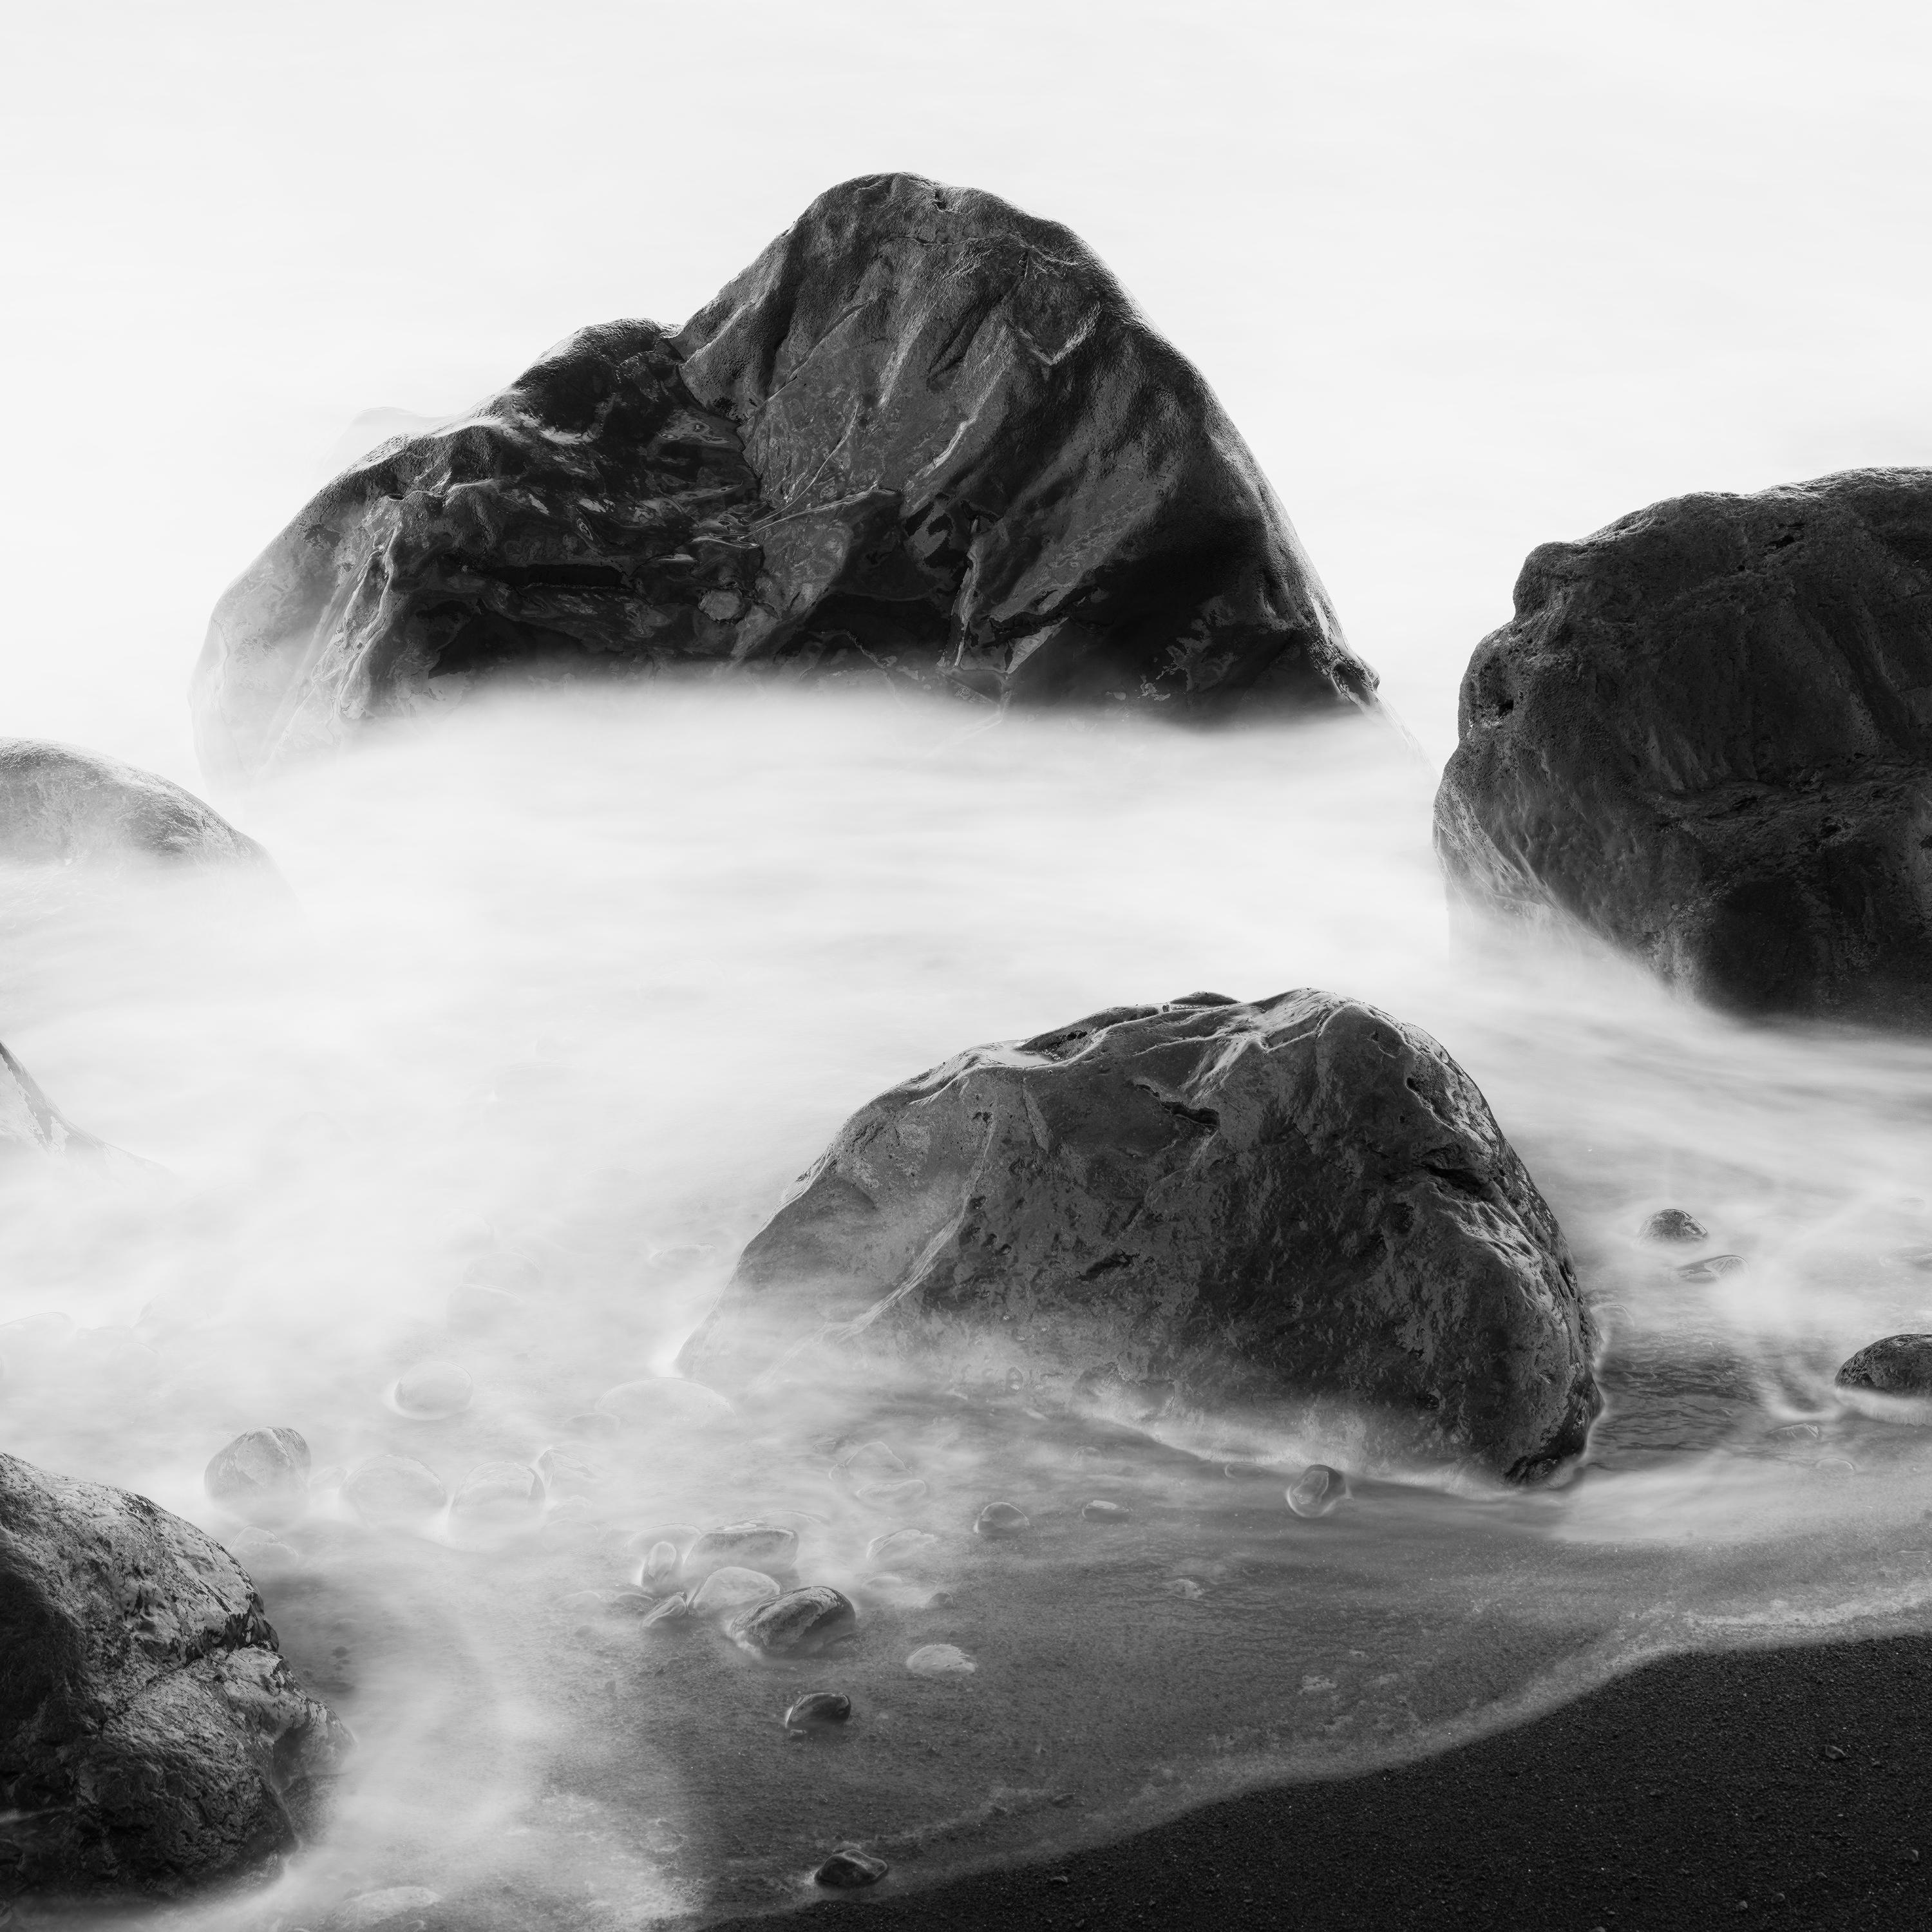 Black and white fine art long exposure waterscape - landscape photography. Big black stones in the surf at La Gomera beach, Spain. Archival pigment ink print as part of a limited edition of 7. All Gerald Berghammer prints are made to order in